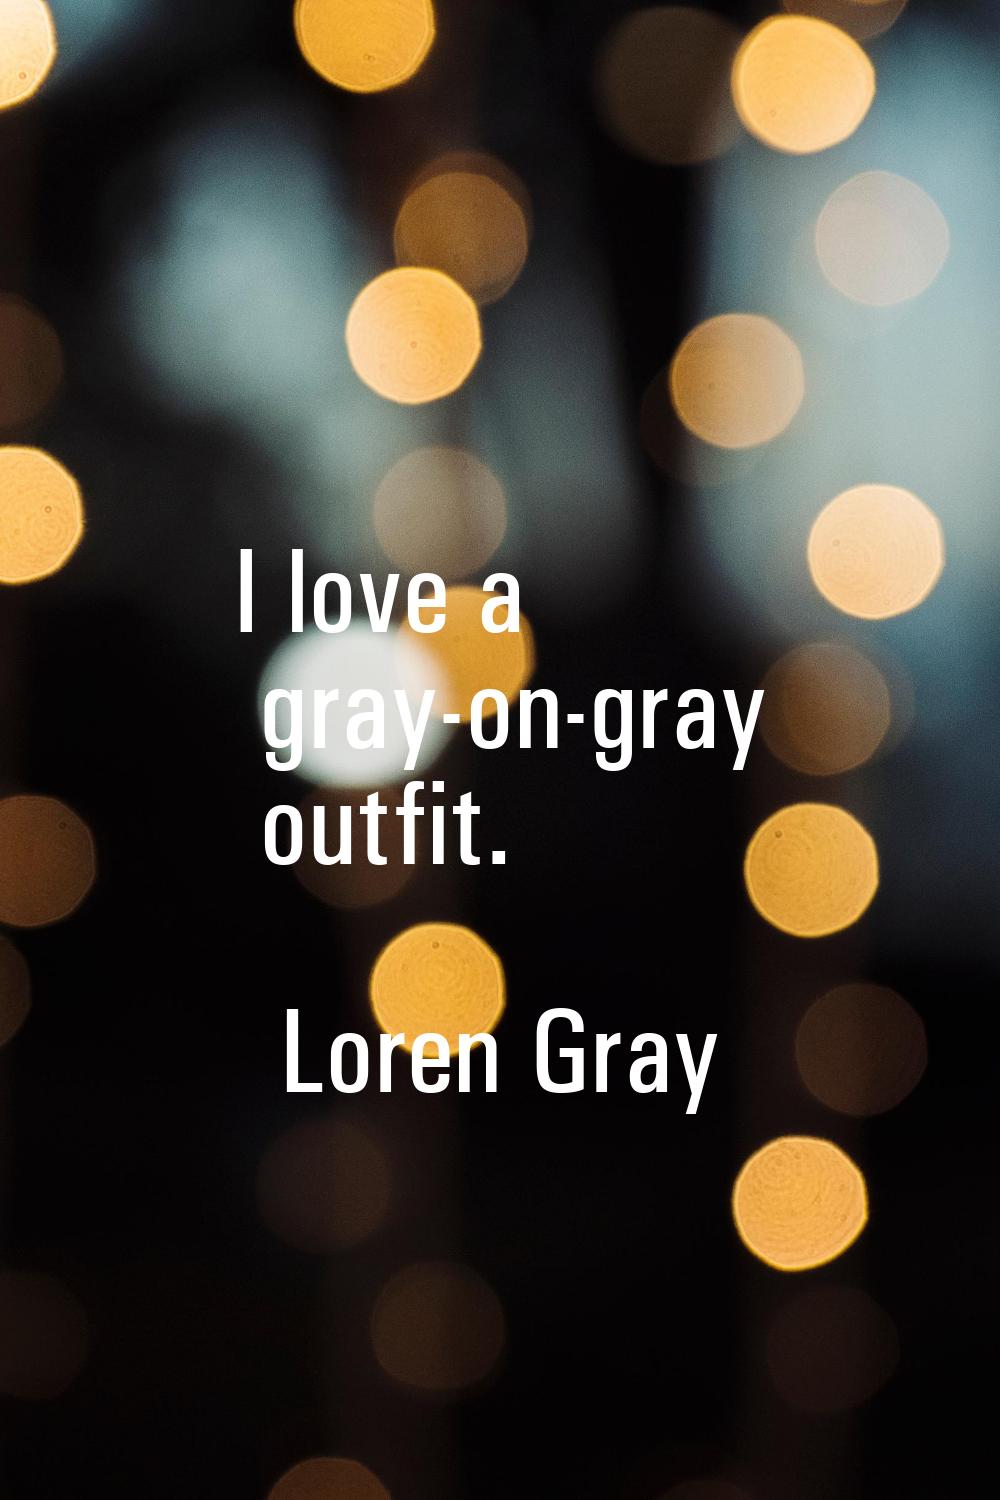 I love a gray-on-gray outfit.